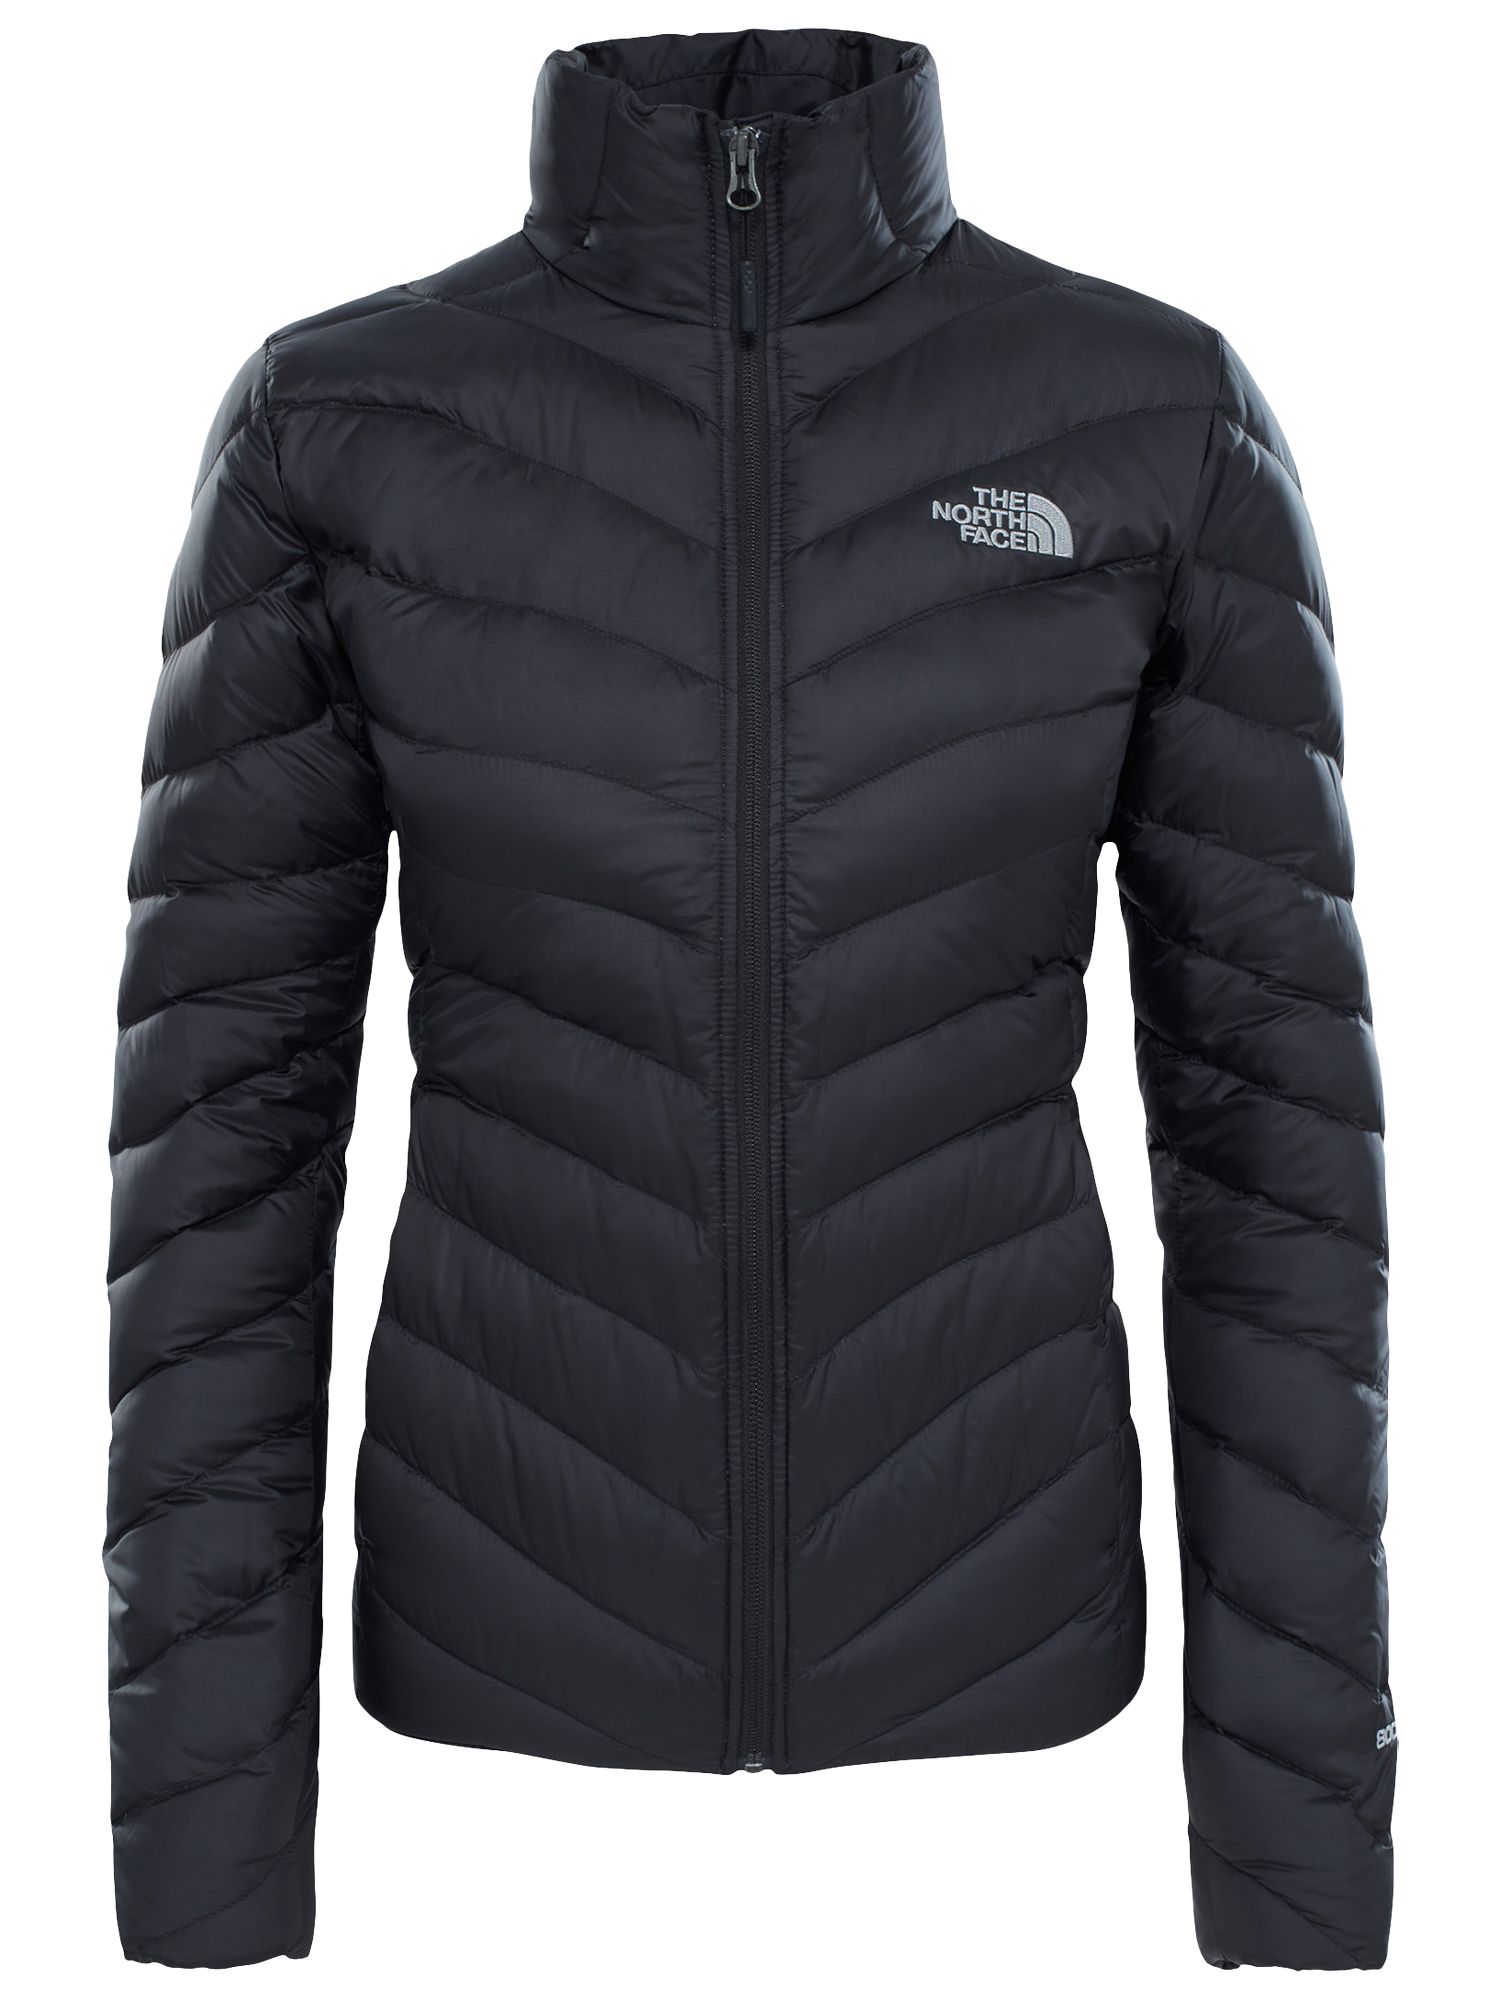 the north face black women's jacket